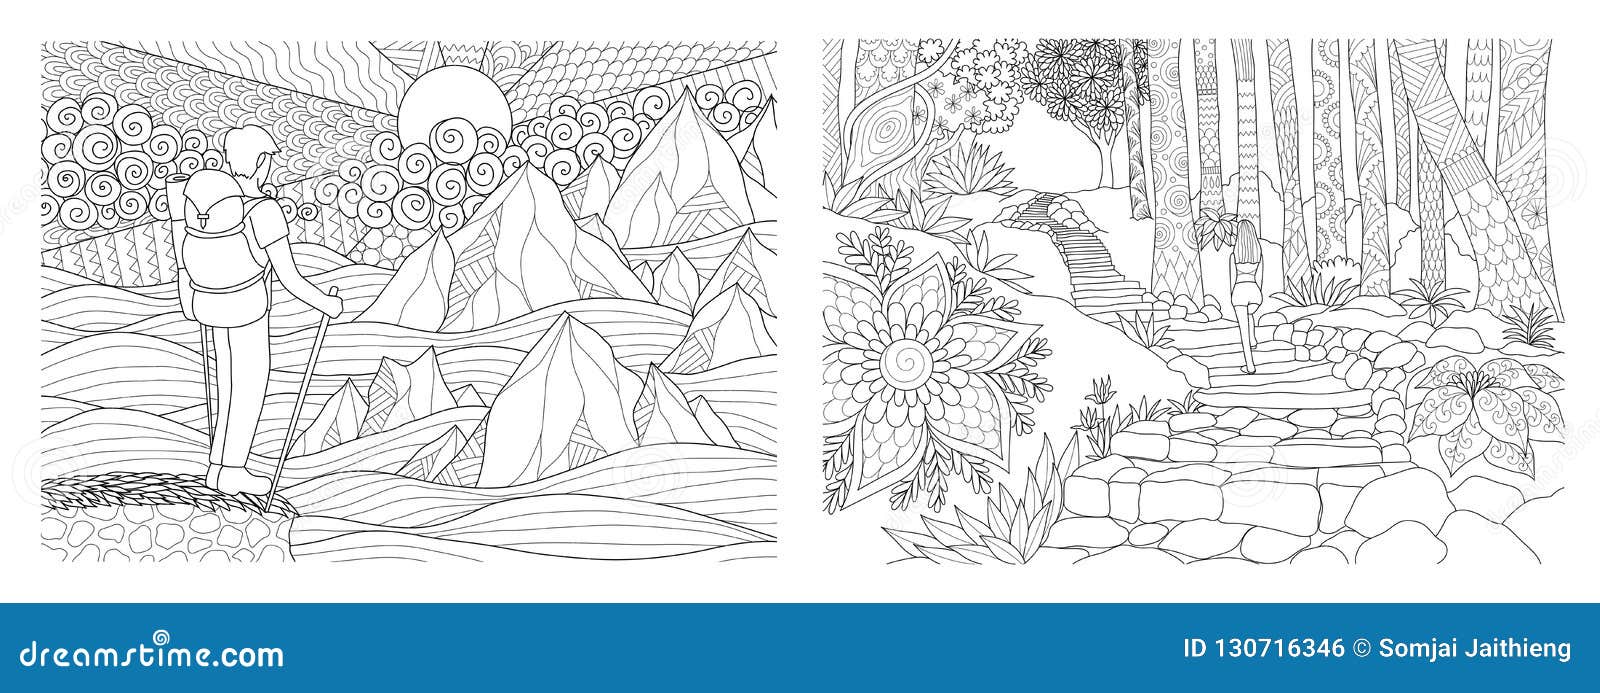 Traveling in Nature Adult Coloring Pages Collection. Vector ...